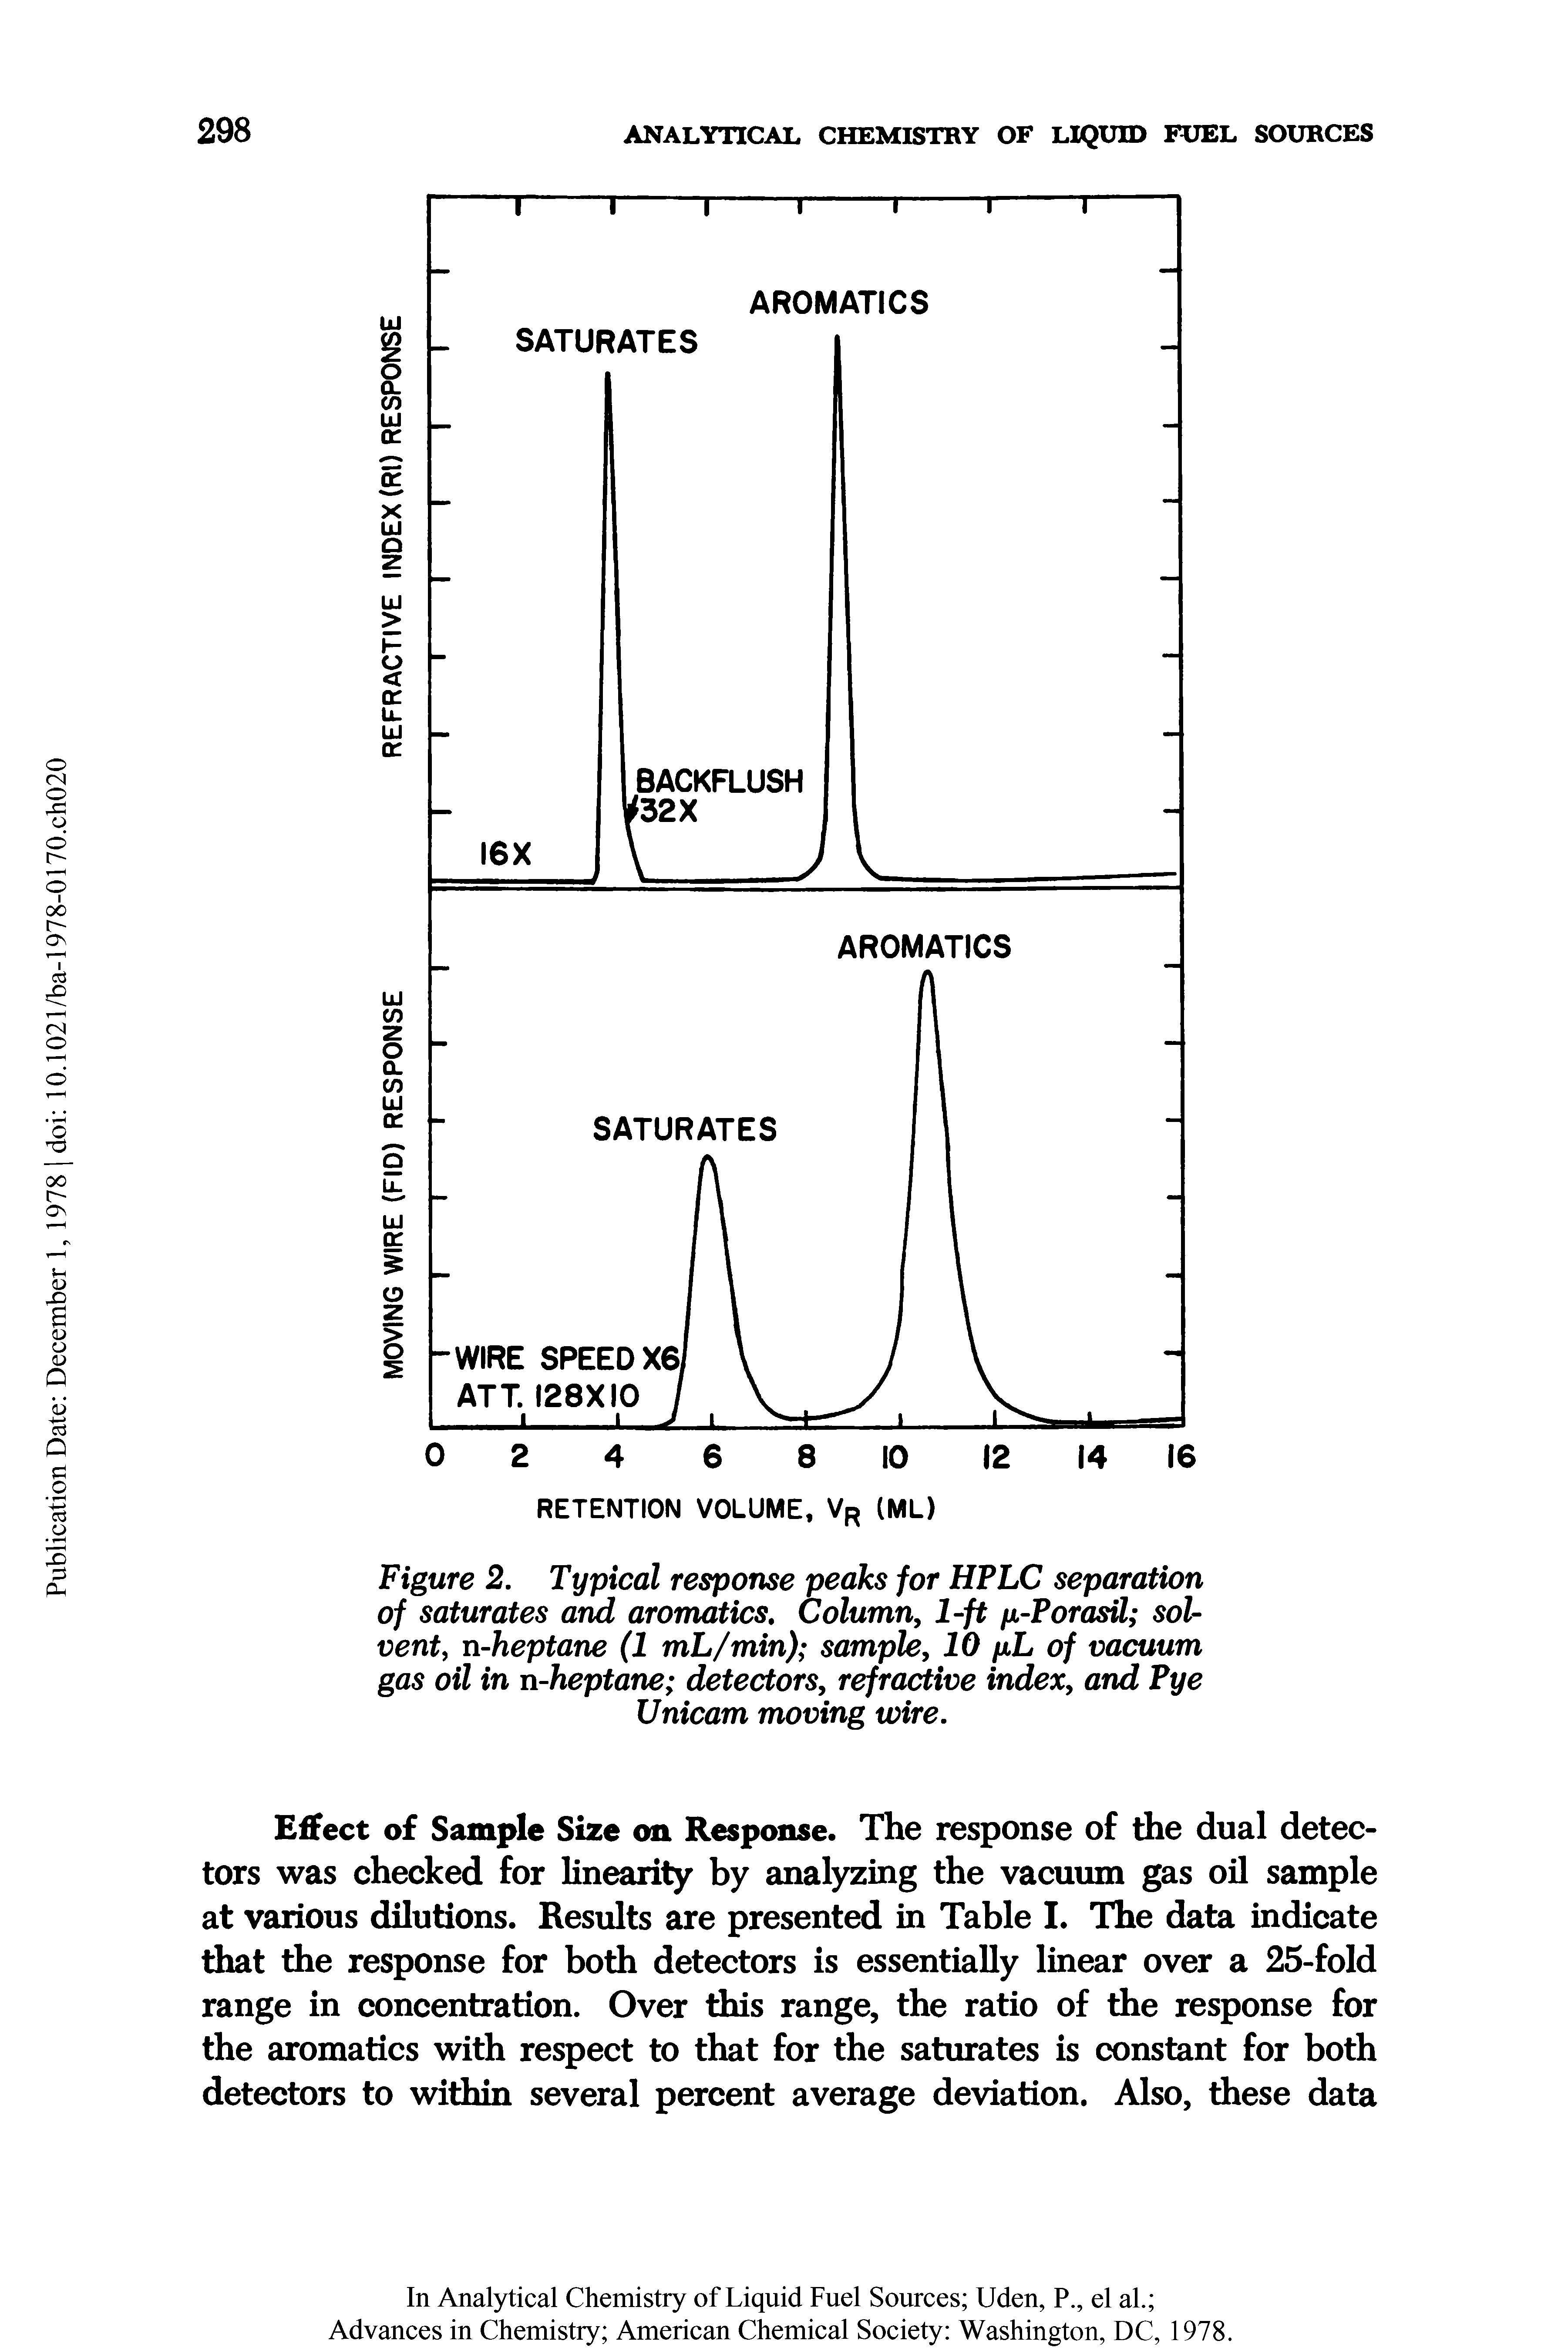 Figure 2. Typical response peaks for HPLC separation of saturates and aromatics. Column, 1-ft /i-PorasU soU vent, n-heptane (1 mL/min) sample, 10 fiL of vacuum gas oil in n-heptane detectors, refractive index, and Pye Unicam moving wire.